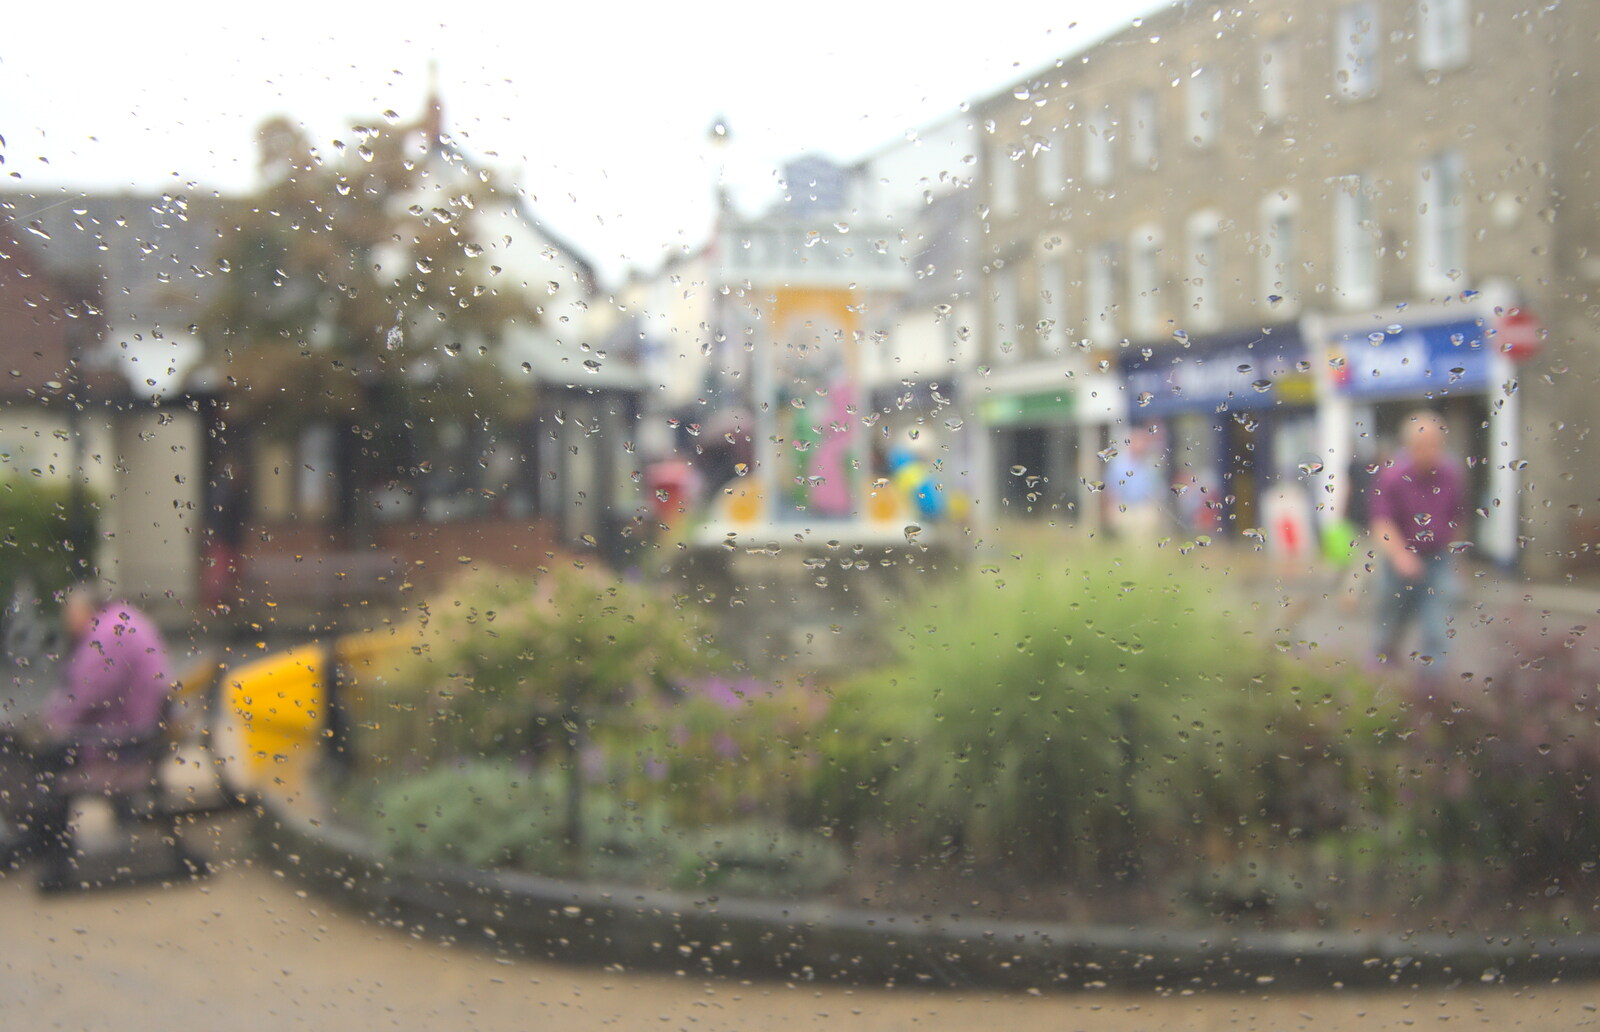 A rain-spattered view of the Diss town sign from Bressingham Gardens, and Building Progress, Brome, Suffolk - 26th August 2013